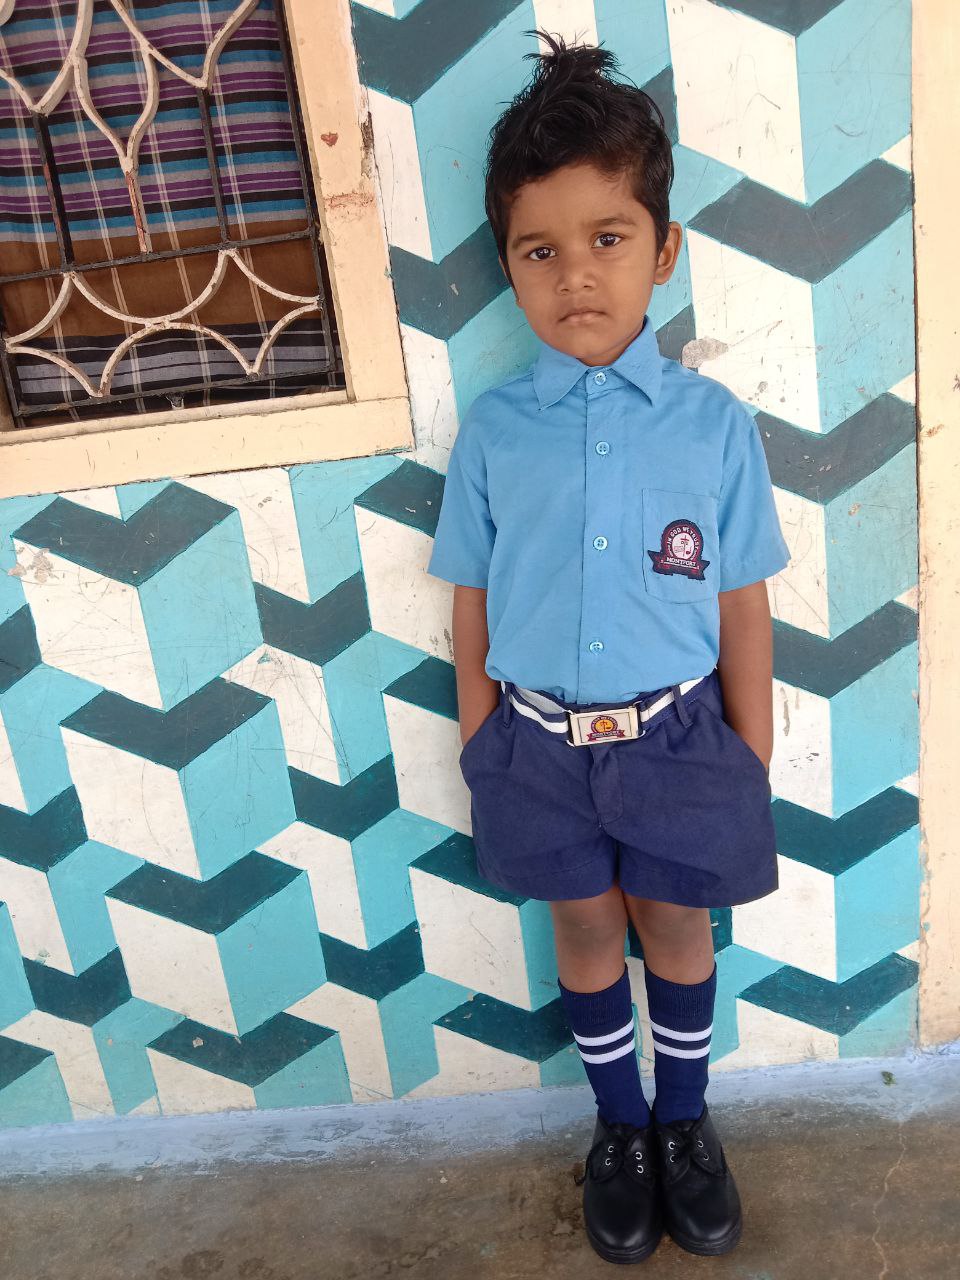 a boy standing in front of a wall with a blue and white design